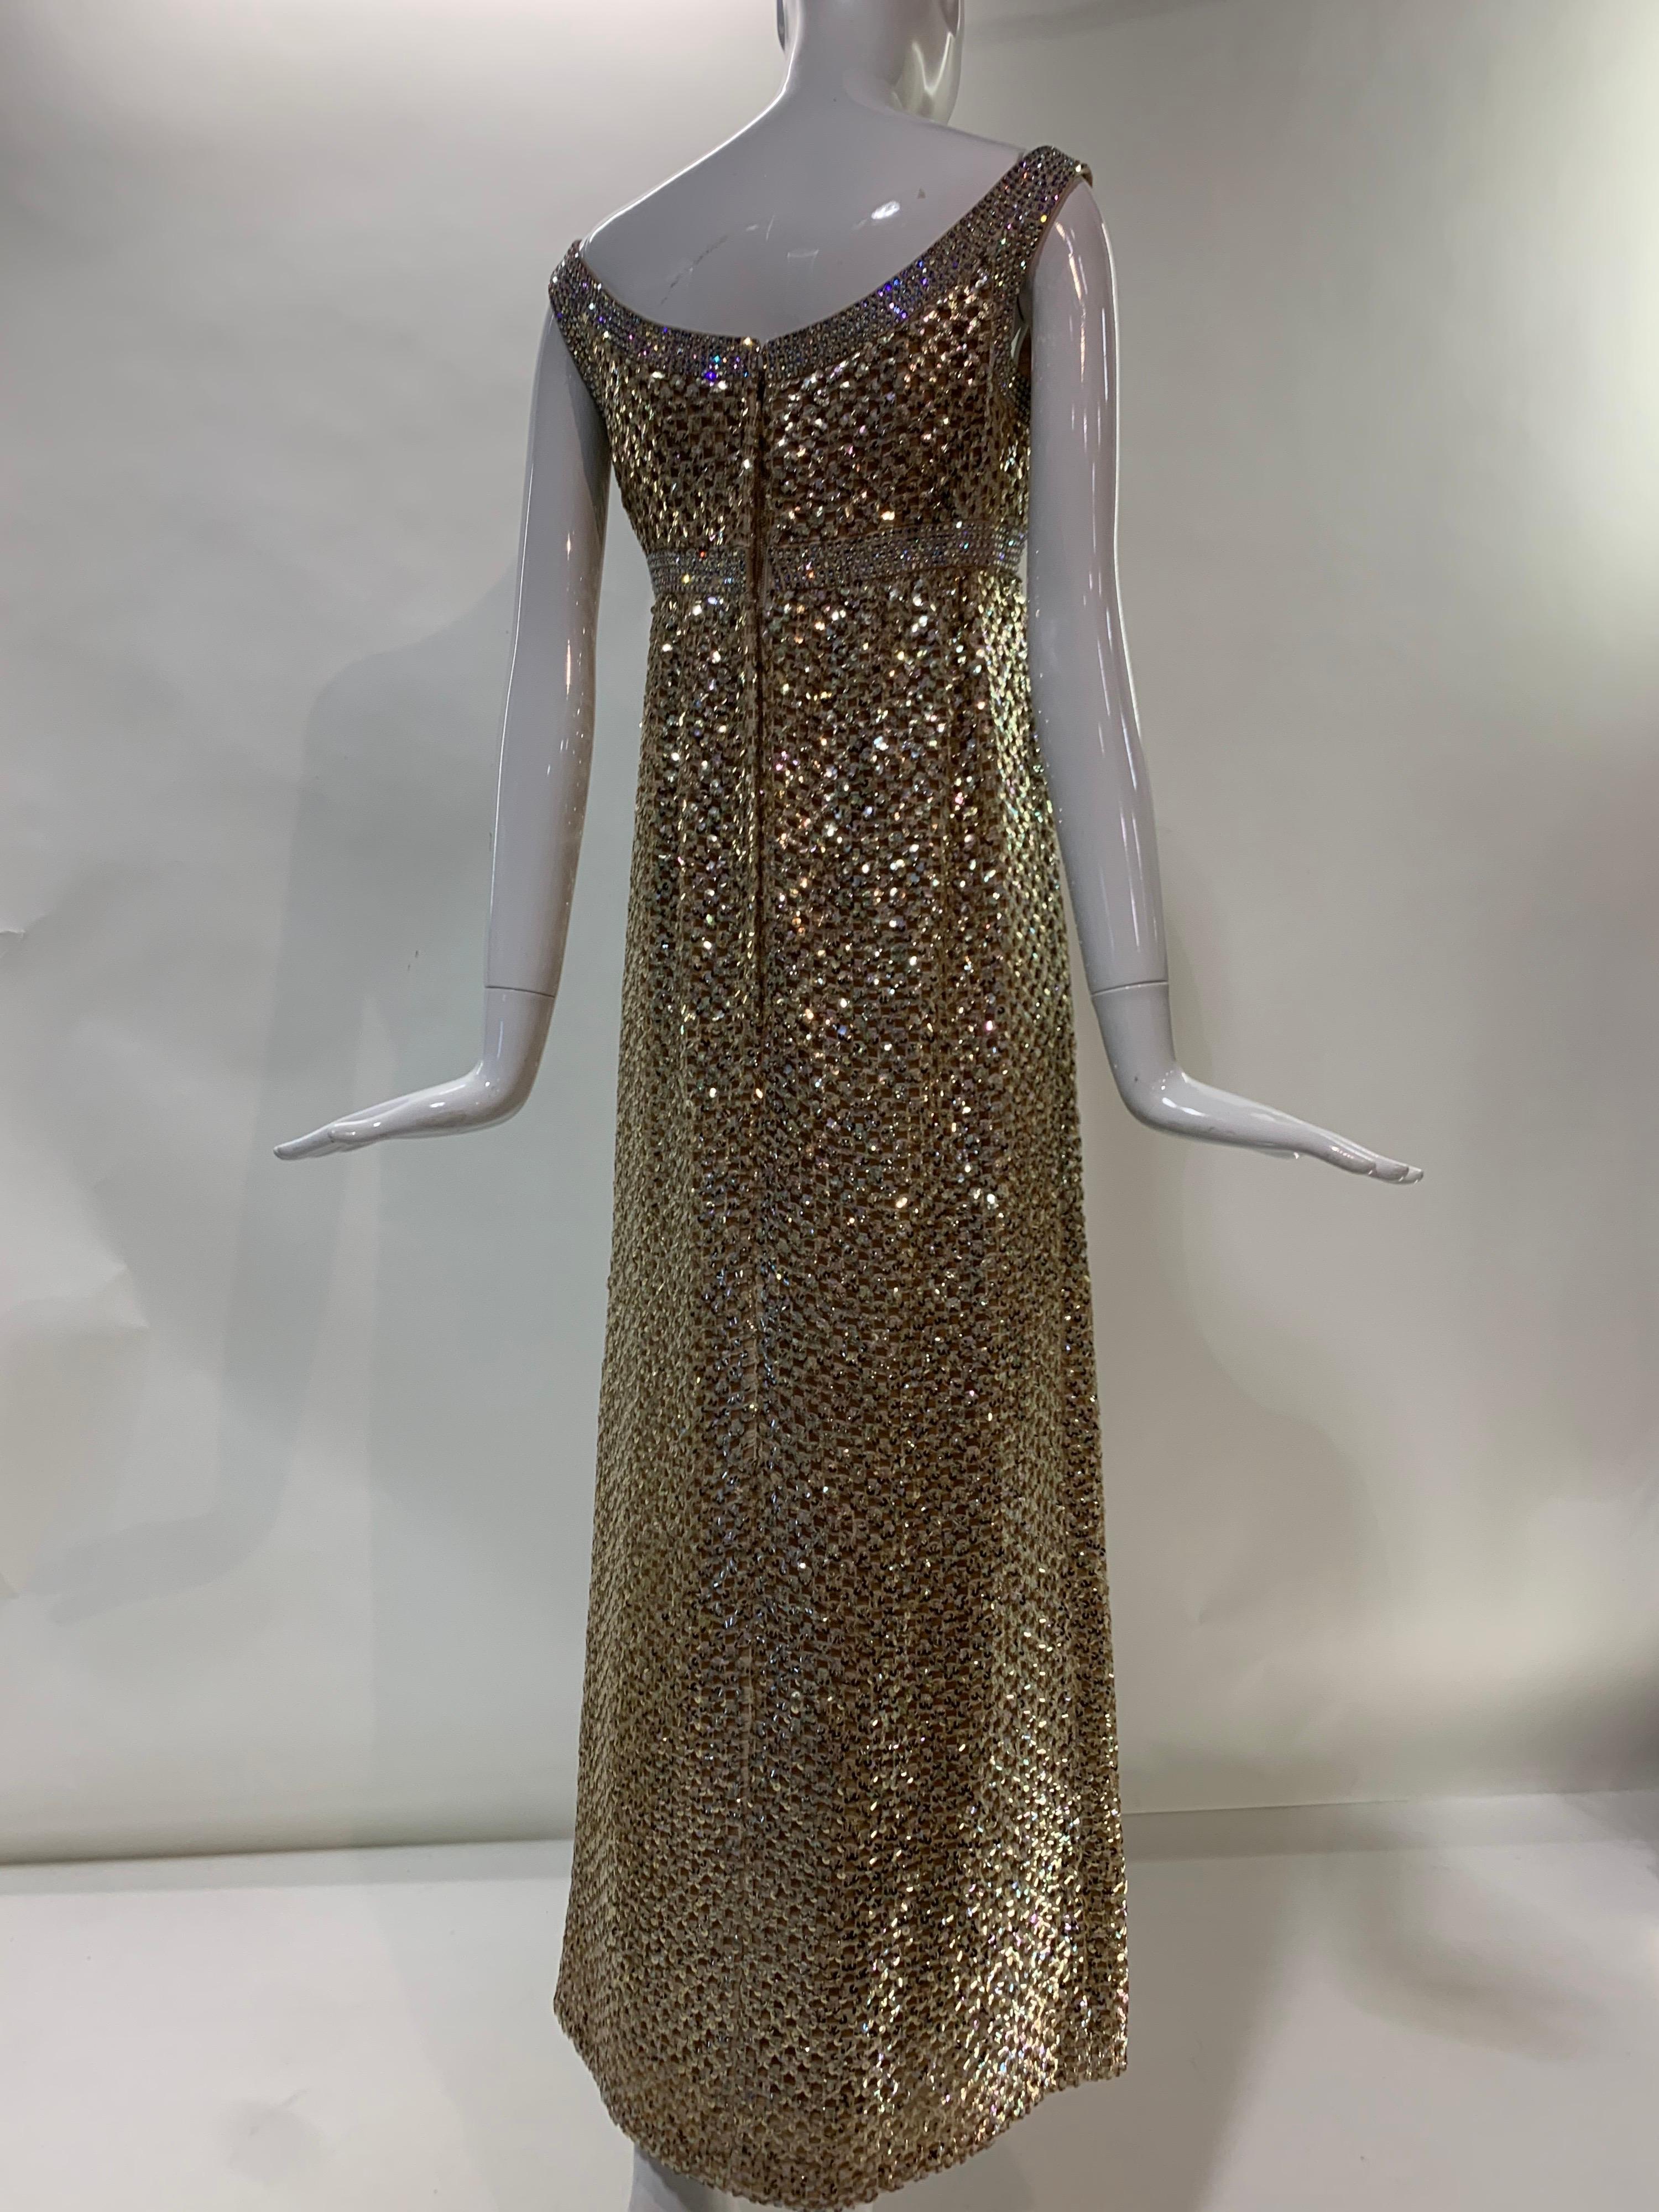 1960s Mod Empire Waist Gown in Gold Sequin Lattice and Iridescent Rhinestones For Sale 3